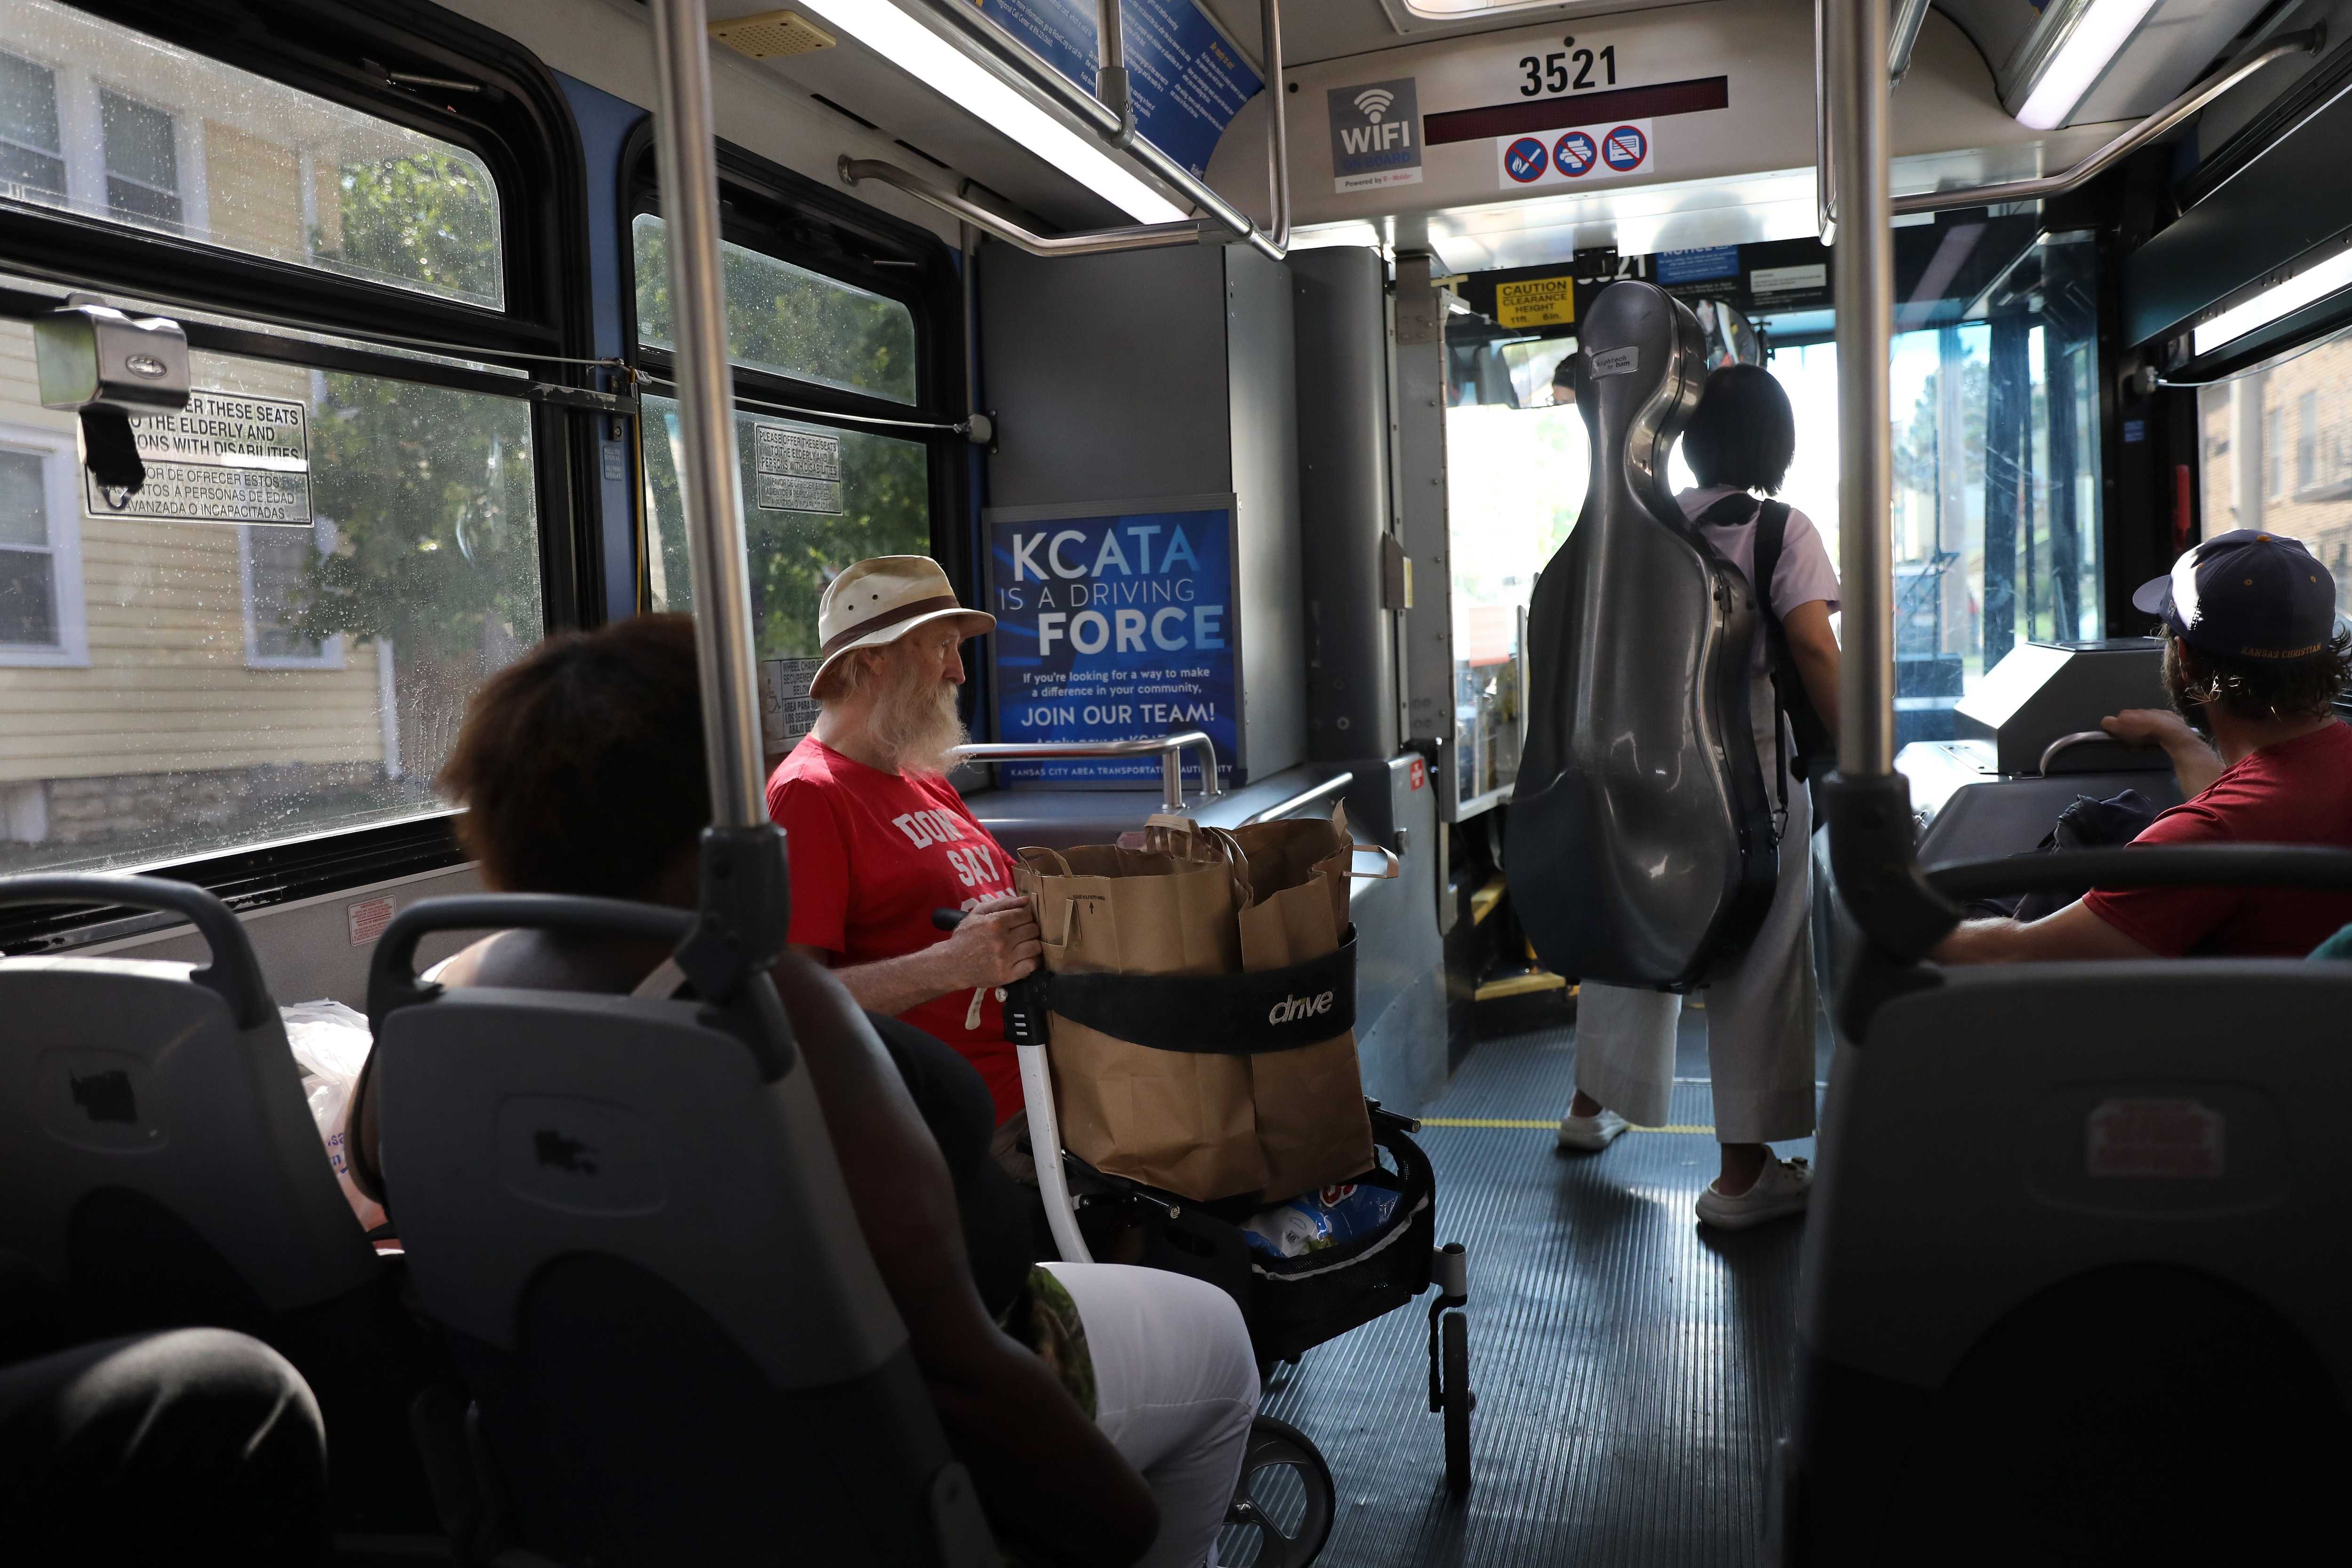 Michael Brennan (left), 74, headed home on the bus after grocery shopping in Kansas City, Mo. Kansas City is the biggest city in the country with free public transportation